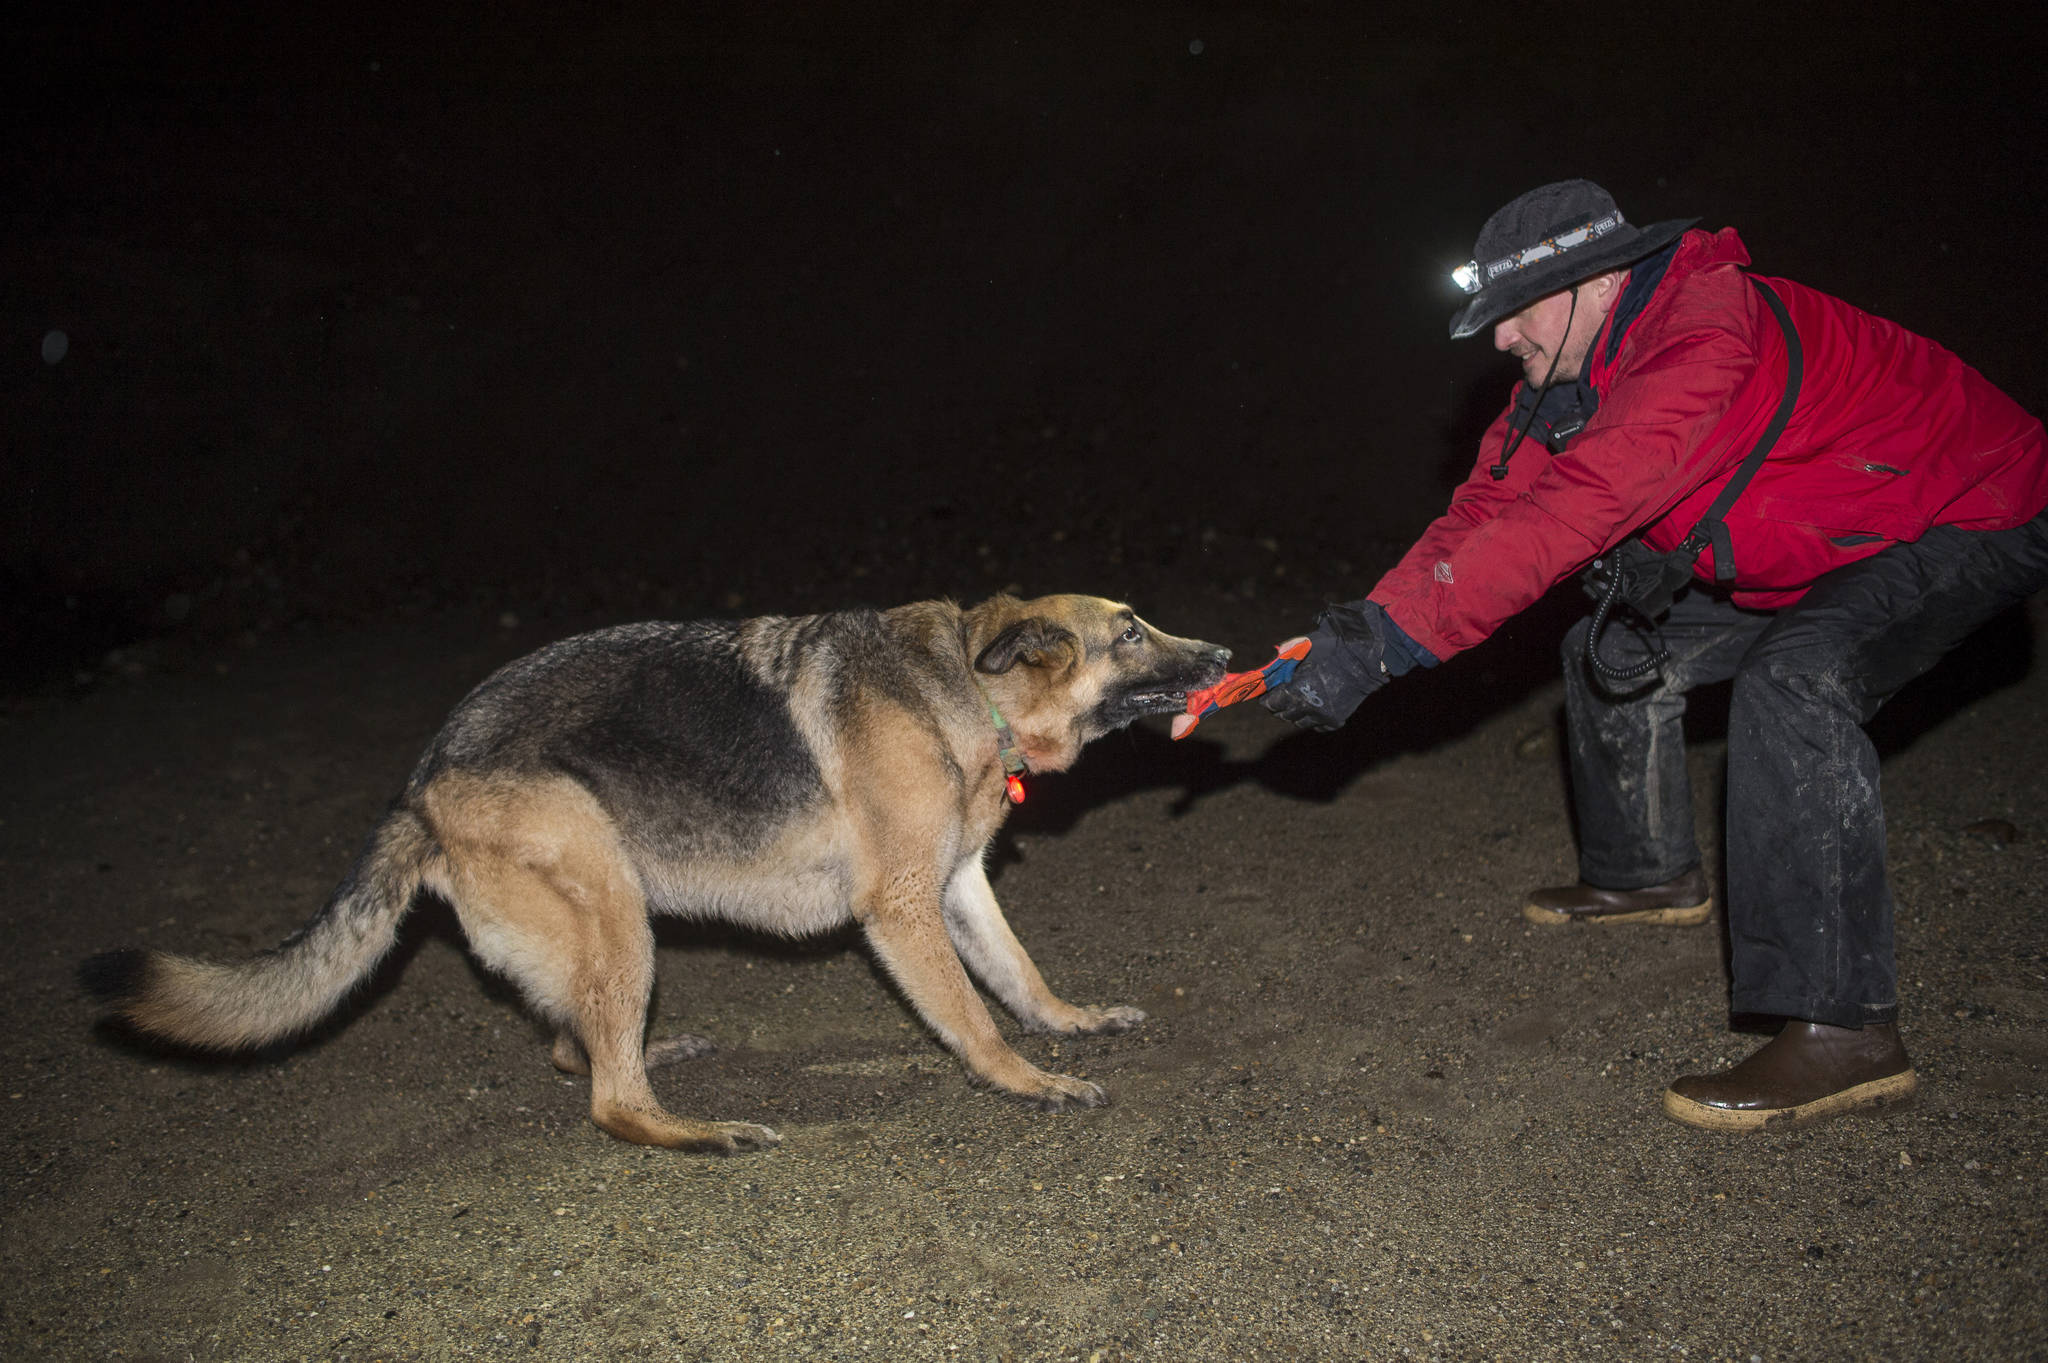 Liam Higgins, plays with his dog, Panzer, as an reward for finding a person during a SEADOGS K-9 search and rescue team practice in Lemon Creek on Wednesday, Dec. 13, 2017. (Michael Penn | Juneau Empire)